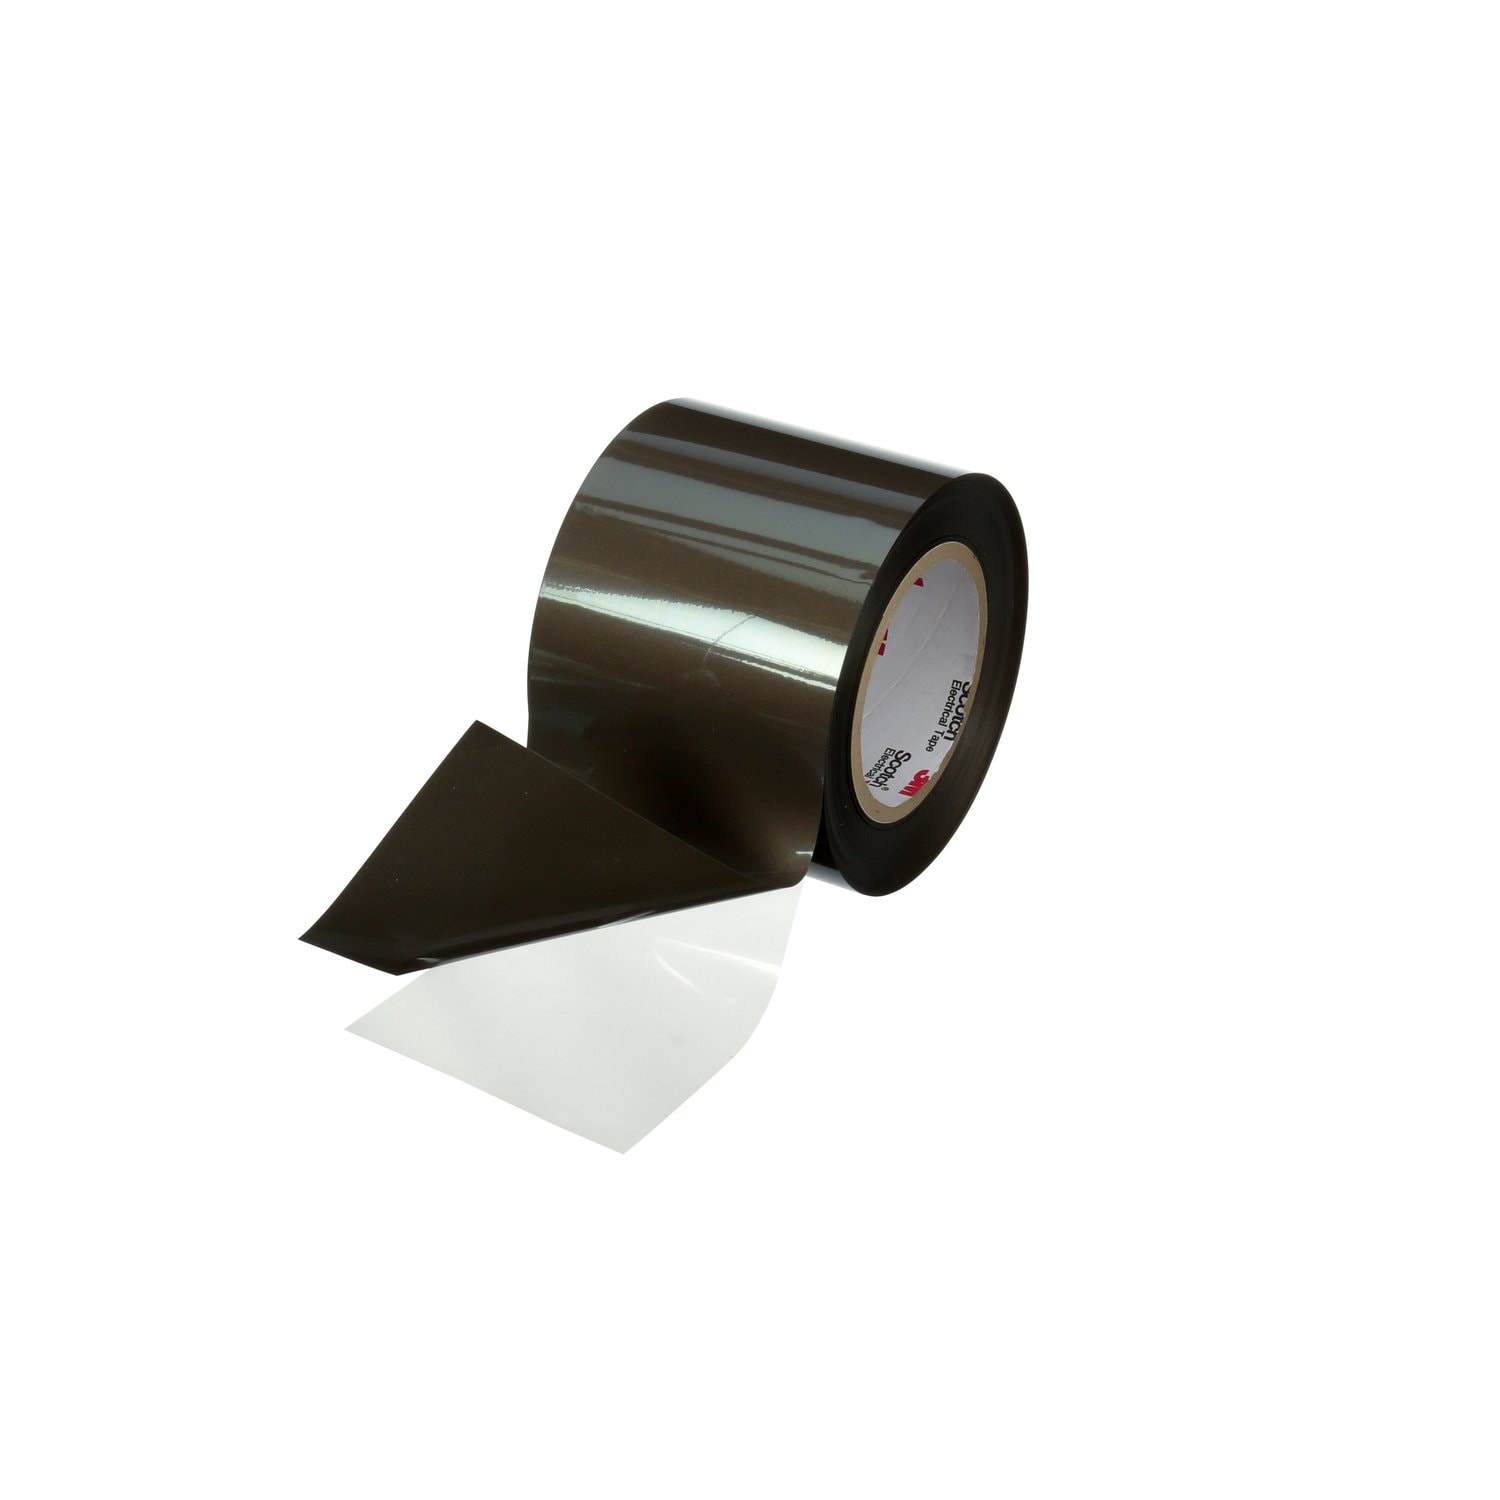 7010352933 - 3M Electrically Conductive Double-Sided Tape 9711S, 1060 mm x 100 m,
200um, 1 Roll/Case